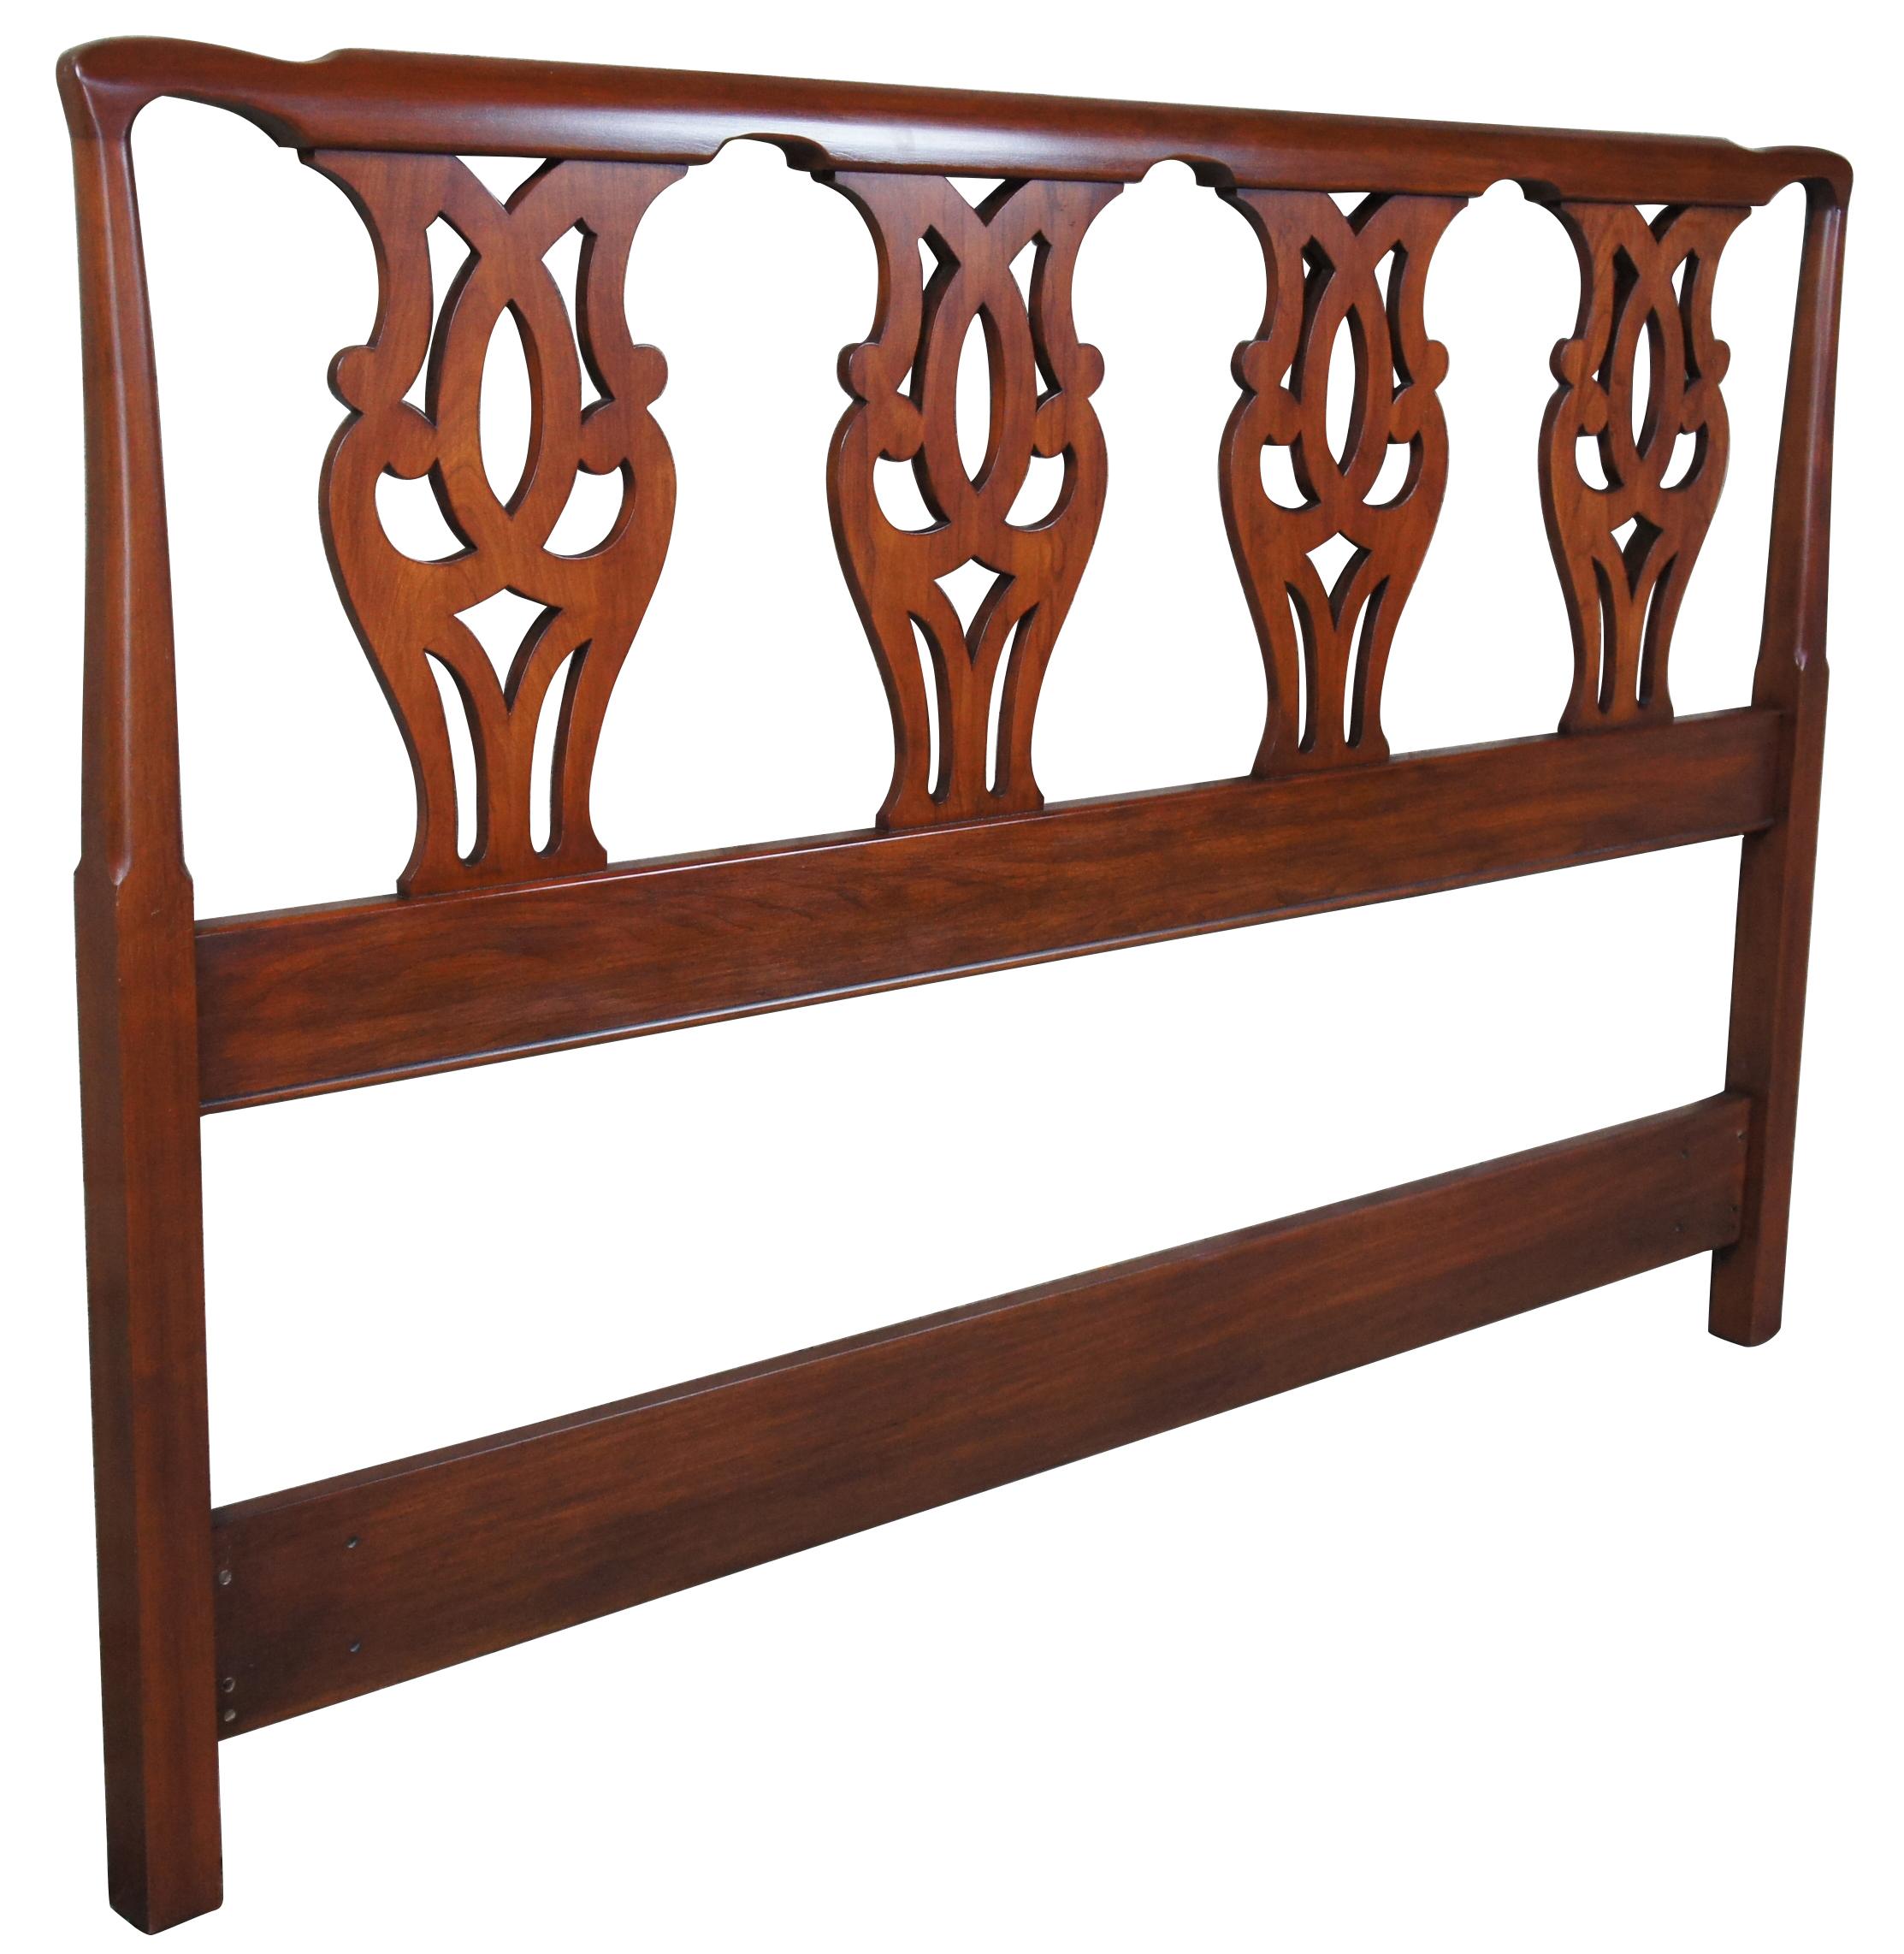 1983 Henkel Harris solid cherry Chippendale style headboard. Features four interlaced back-splats and can be used for queen or full sized beds.
 